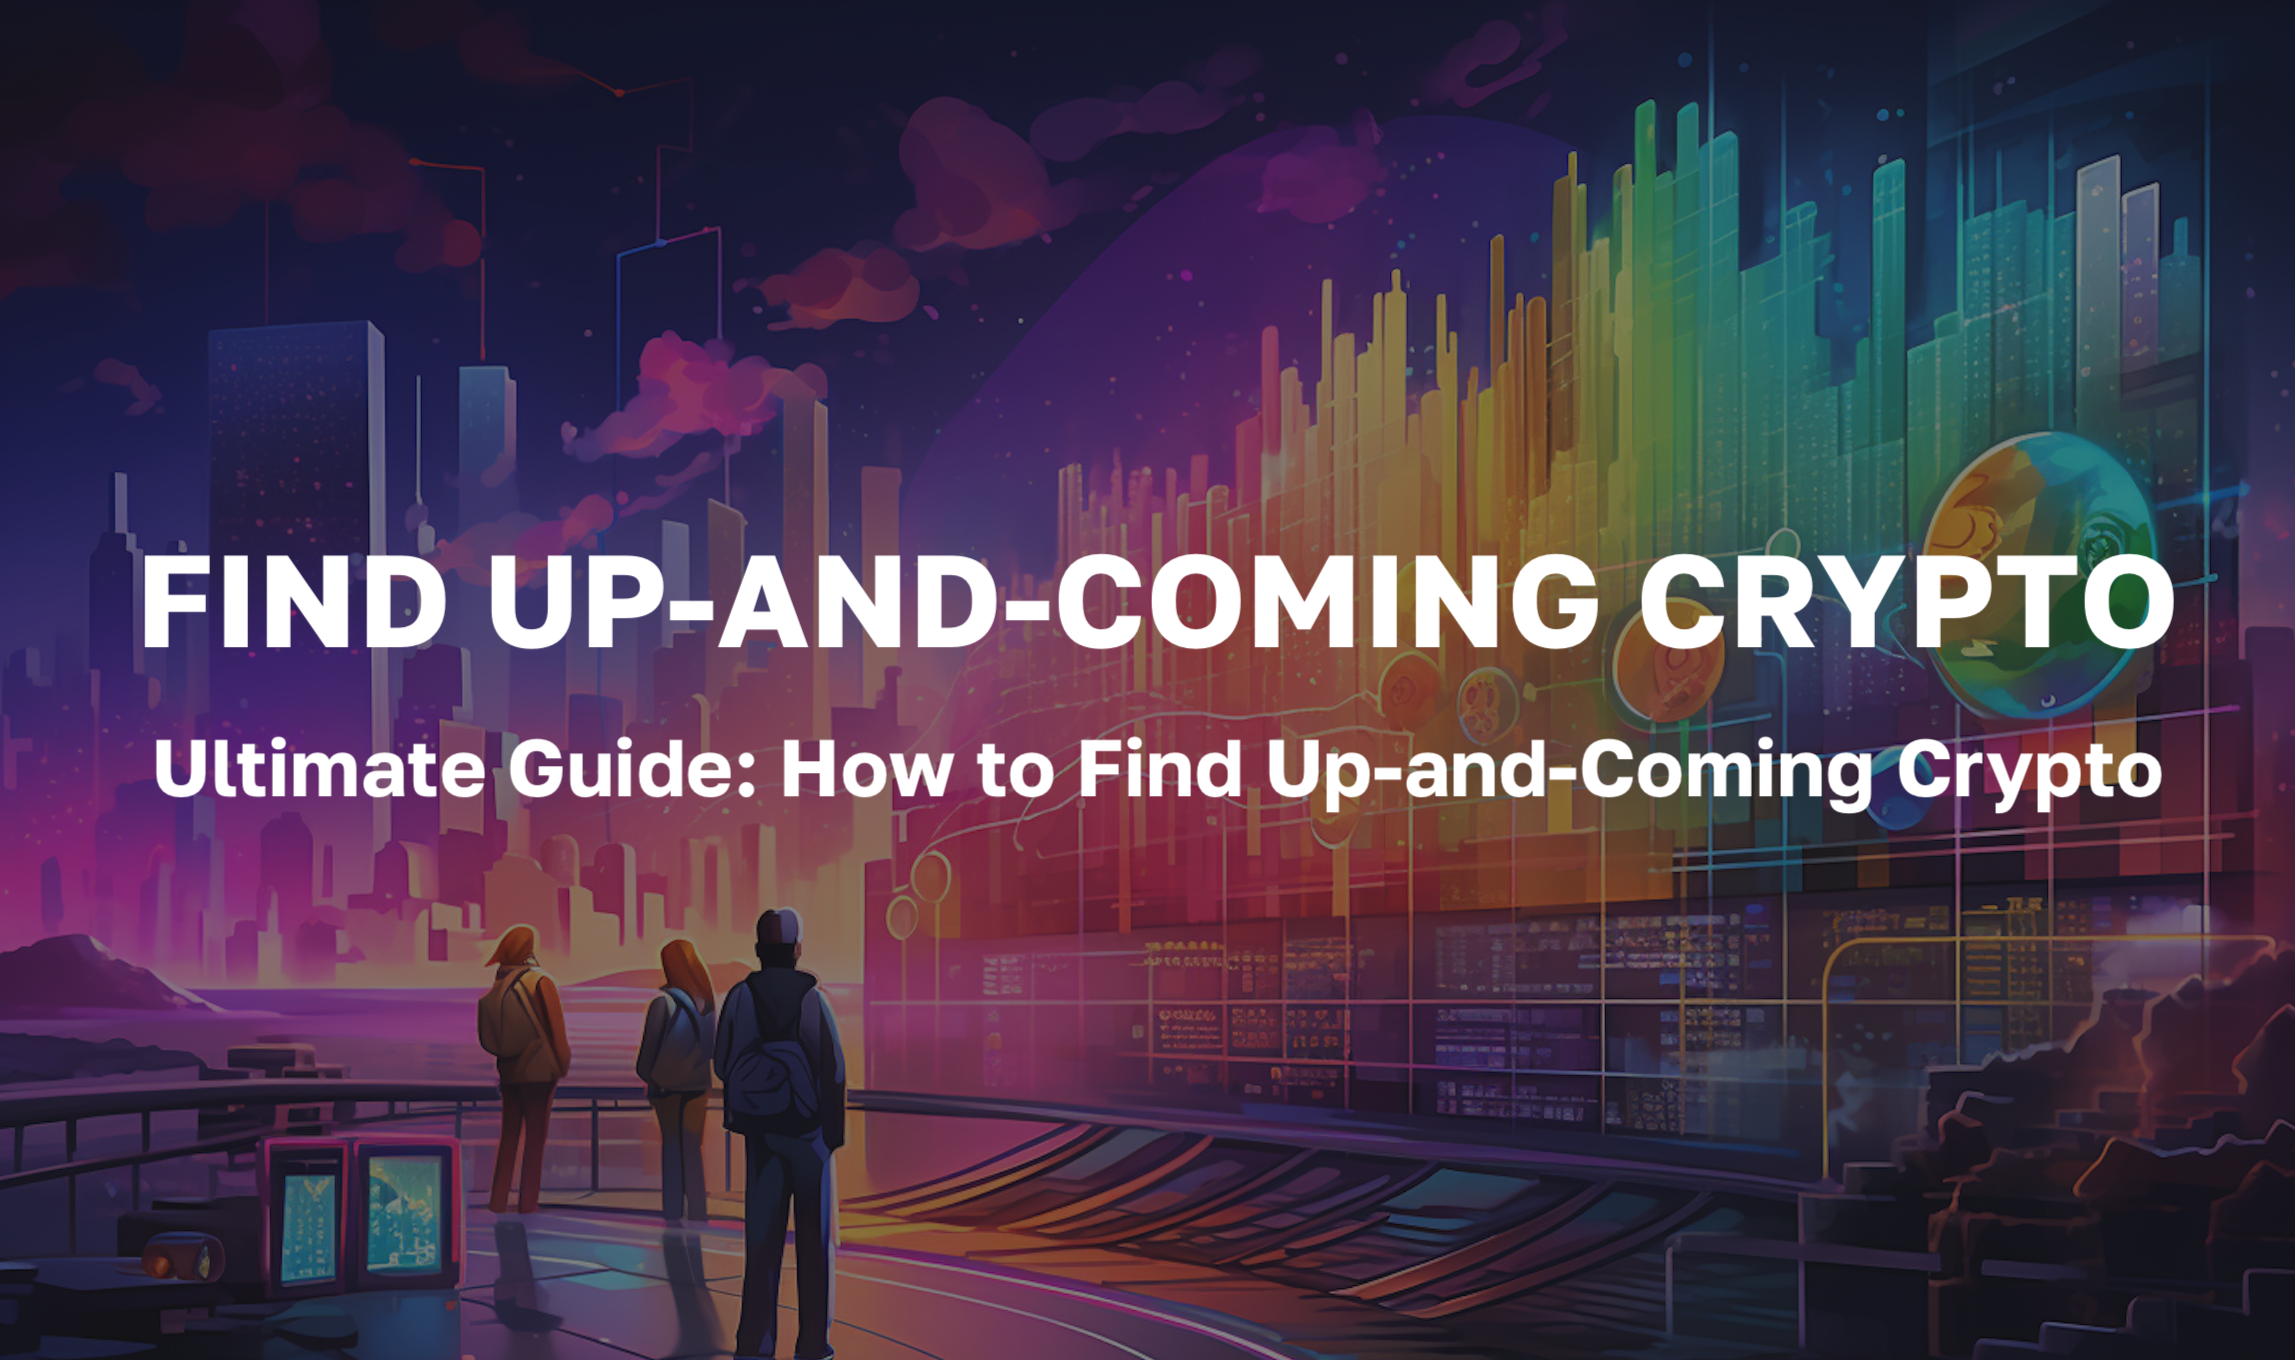 Ultimate-Guide-How-to-Find-Up-and-Coming-Crypto